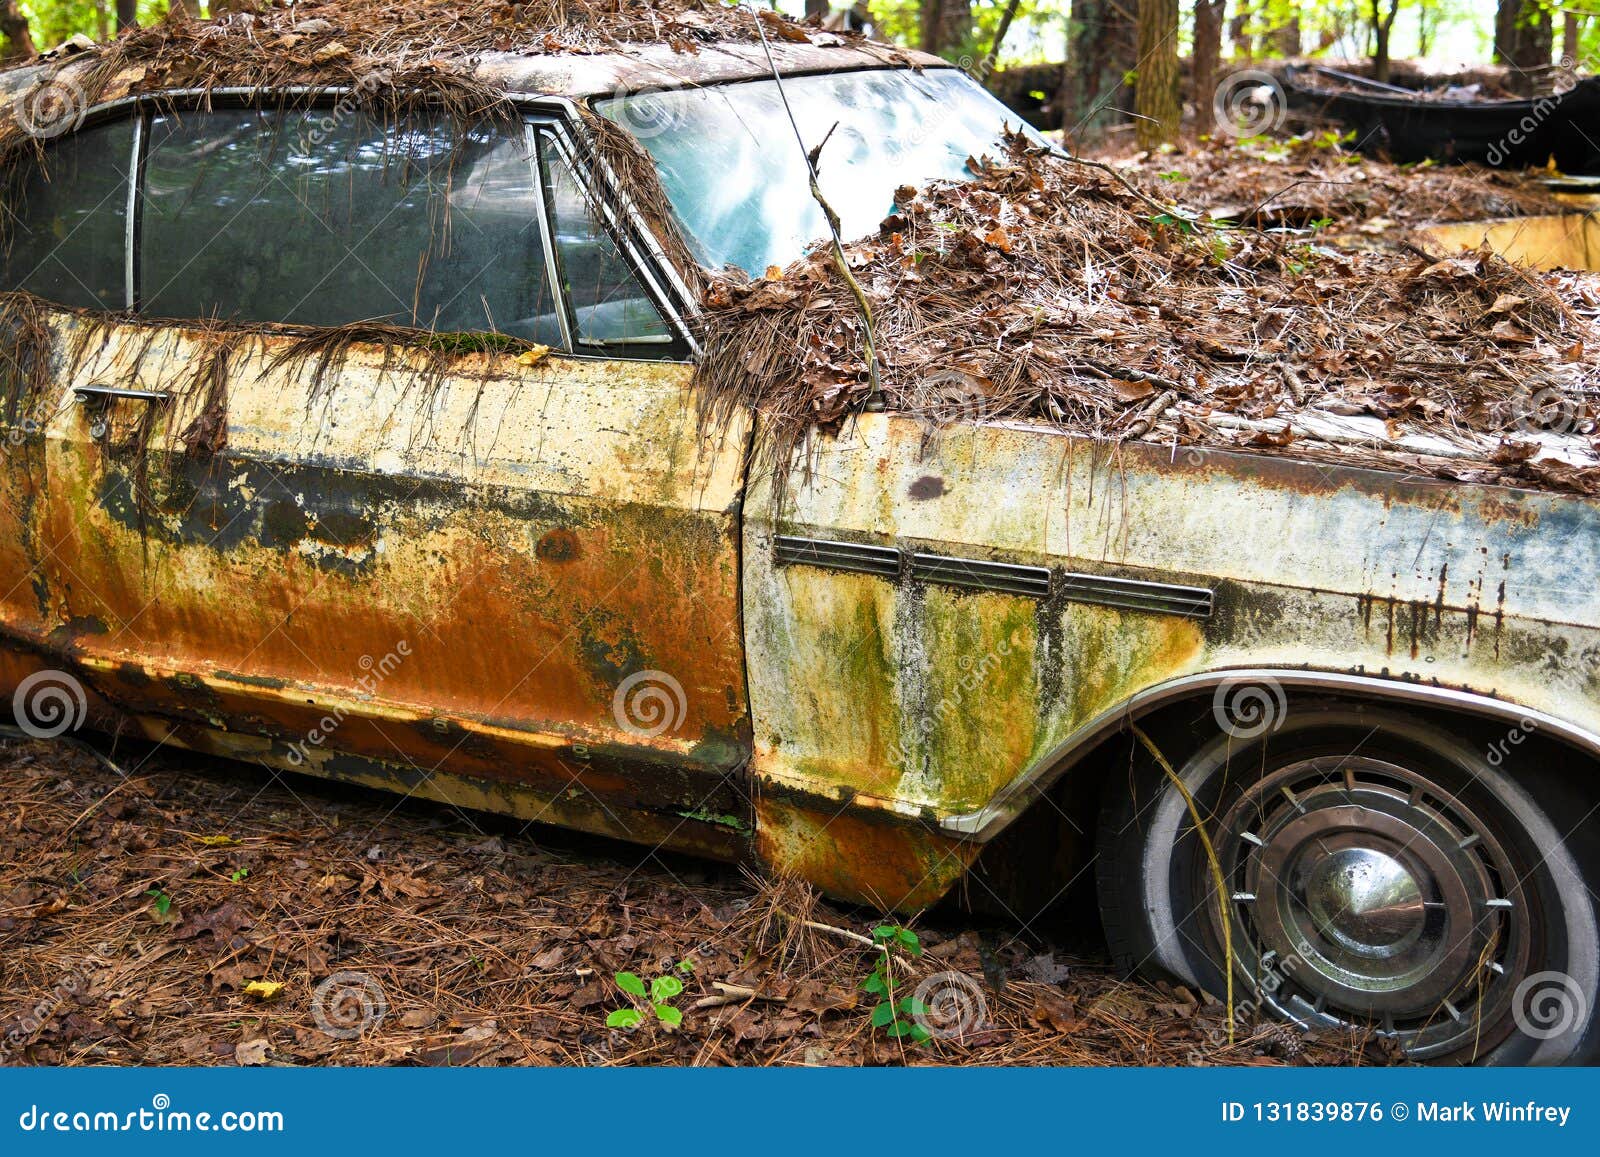 Old Scrap Car stock photo. Image of automobile, background ...